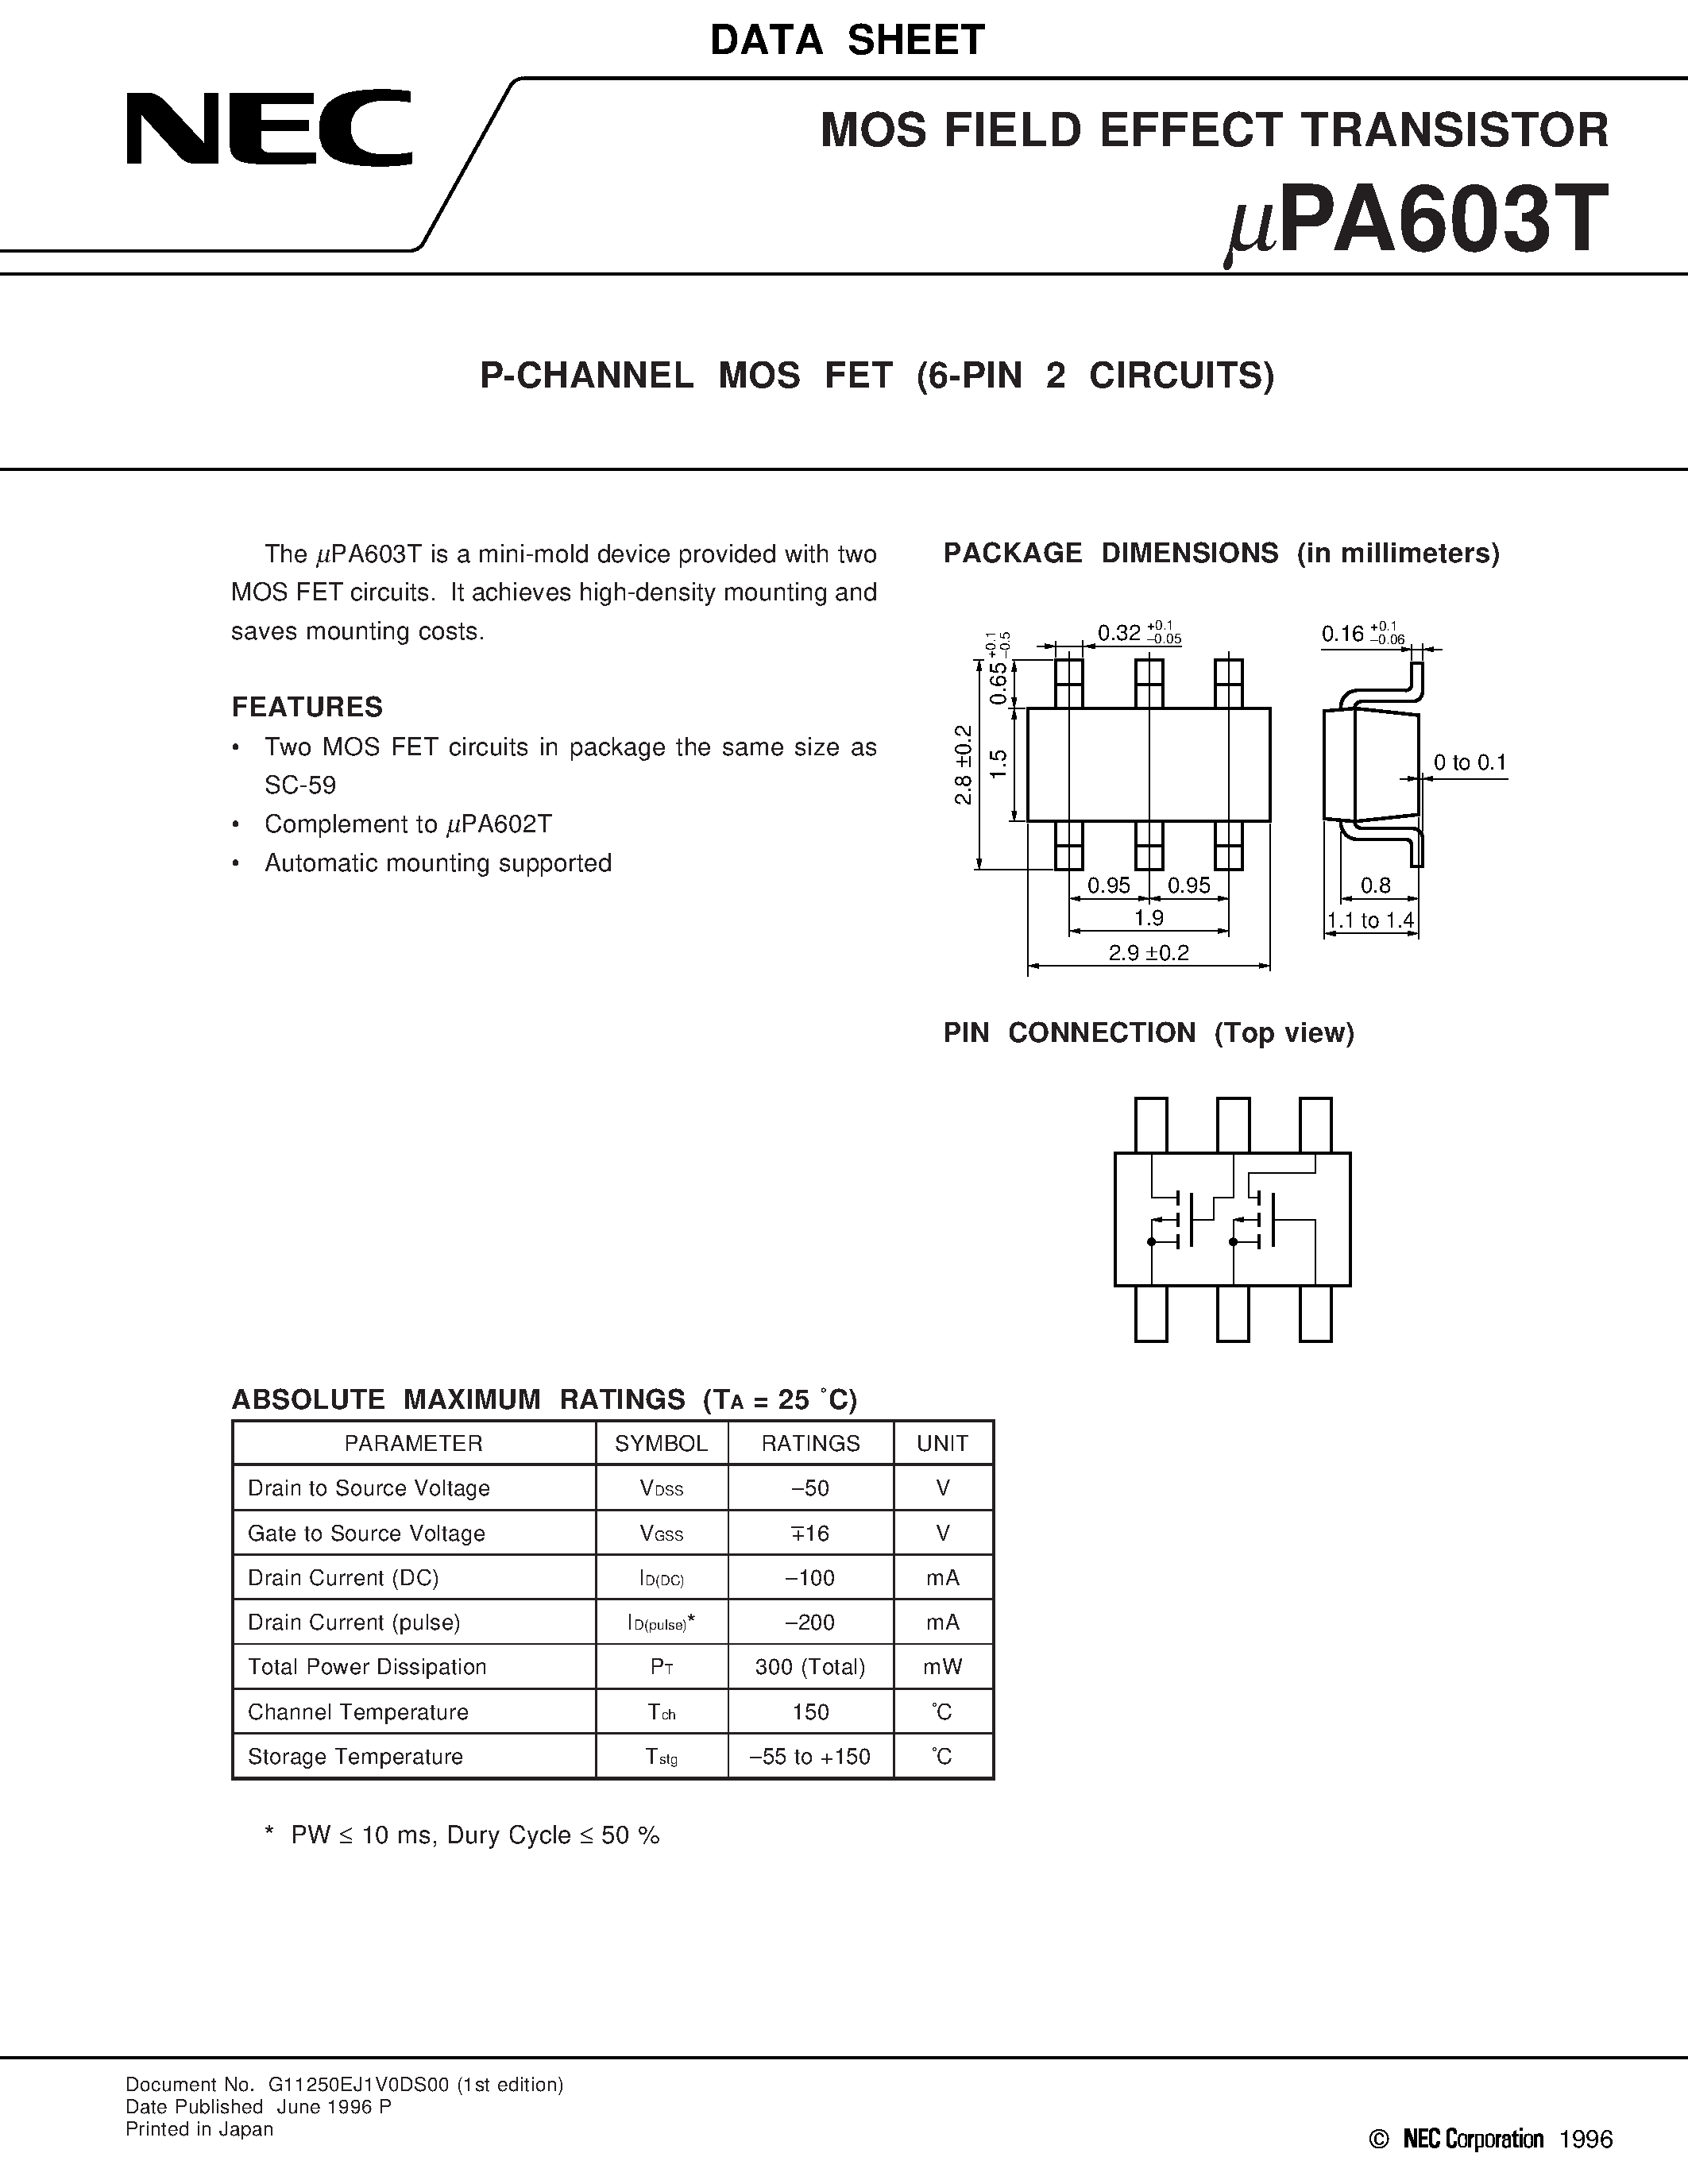 Datasheet UPA603T - P-CHANNEL MOS FET 6-PIN 2 CIRCUITS page 1